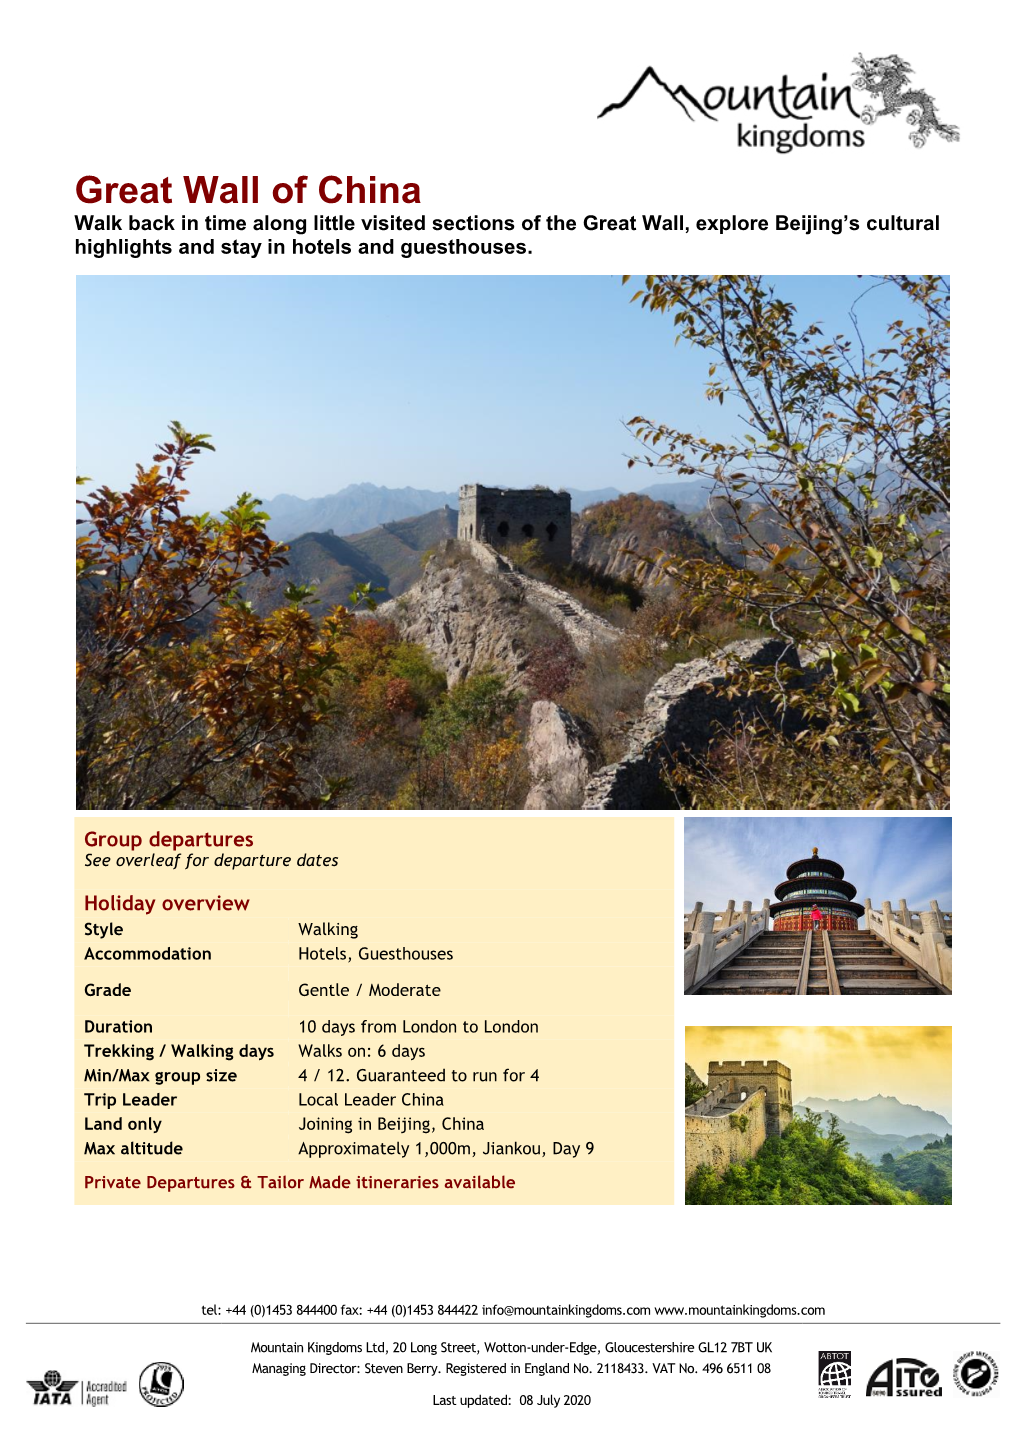 Great Wall of China Walk Back in Time Along Little Visited Sections of the Great Wall, Explore Beijing’S Cultural Highlights and Stay in Hotels and Guesthouses